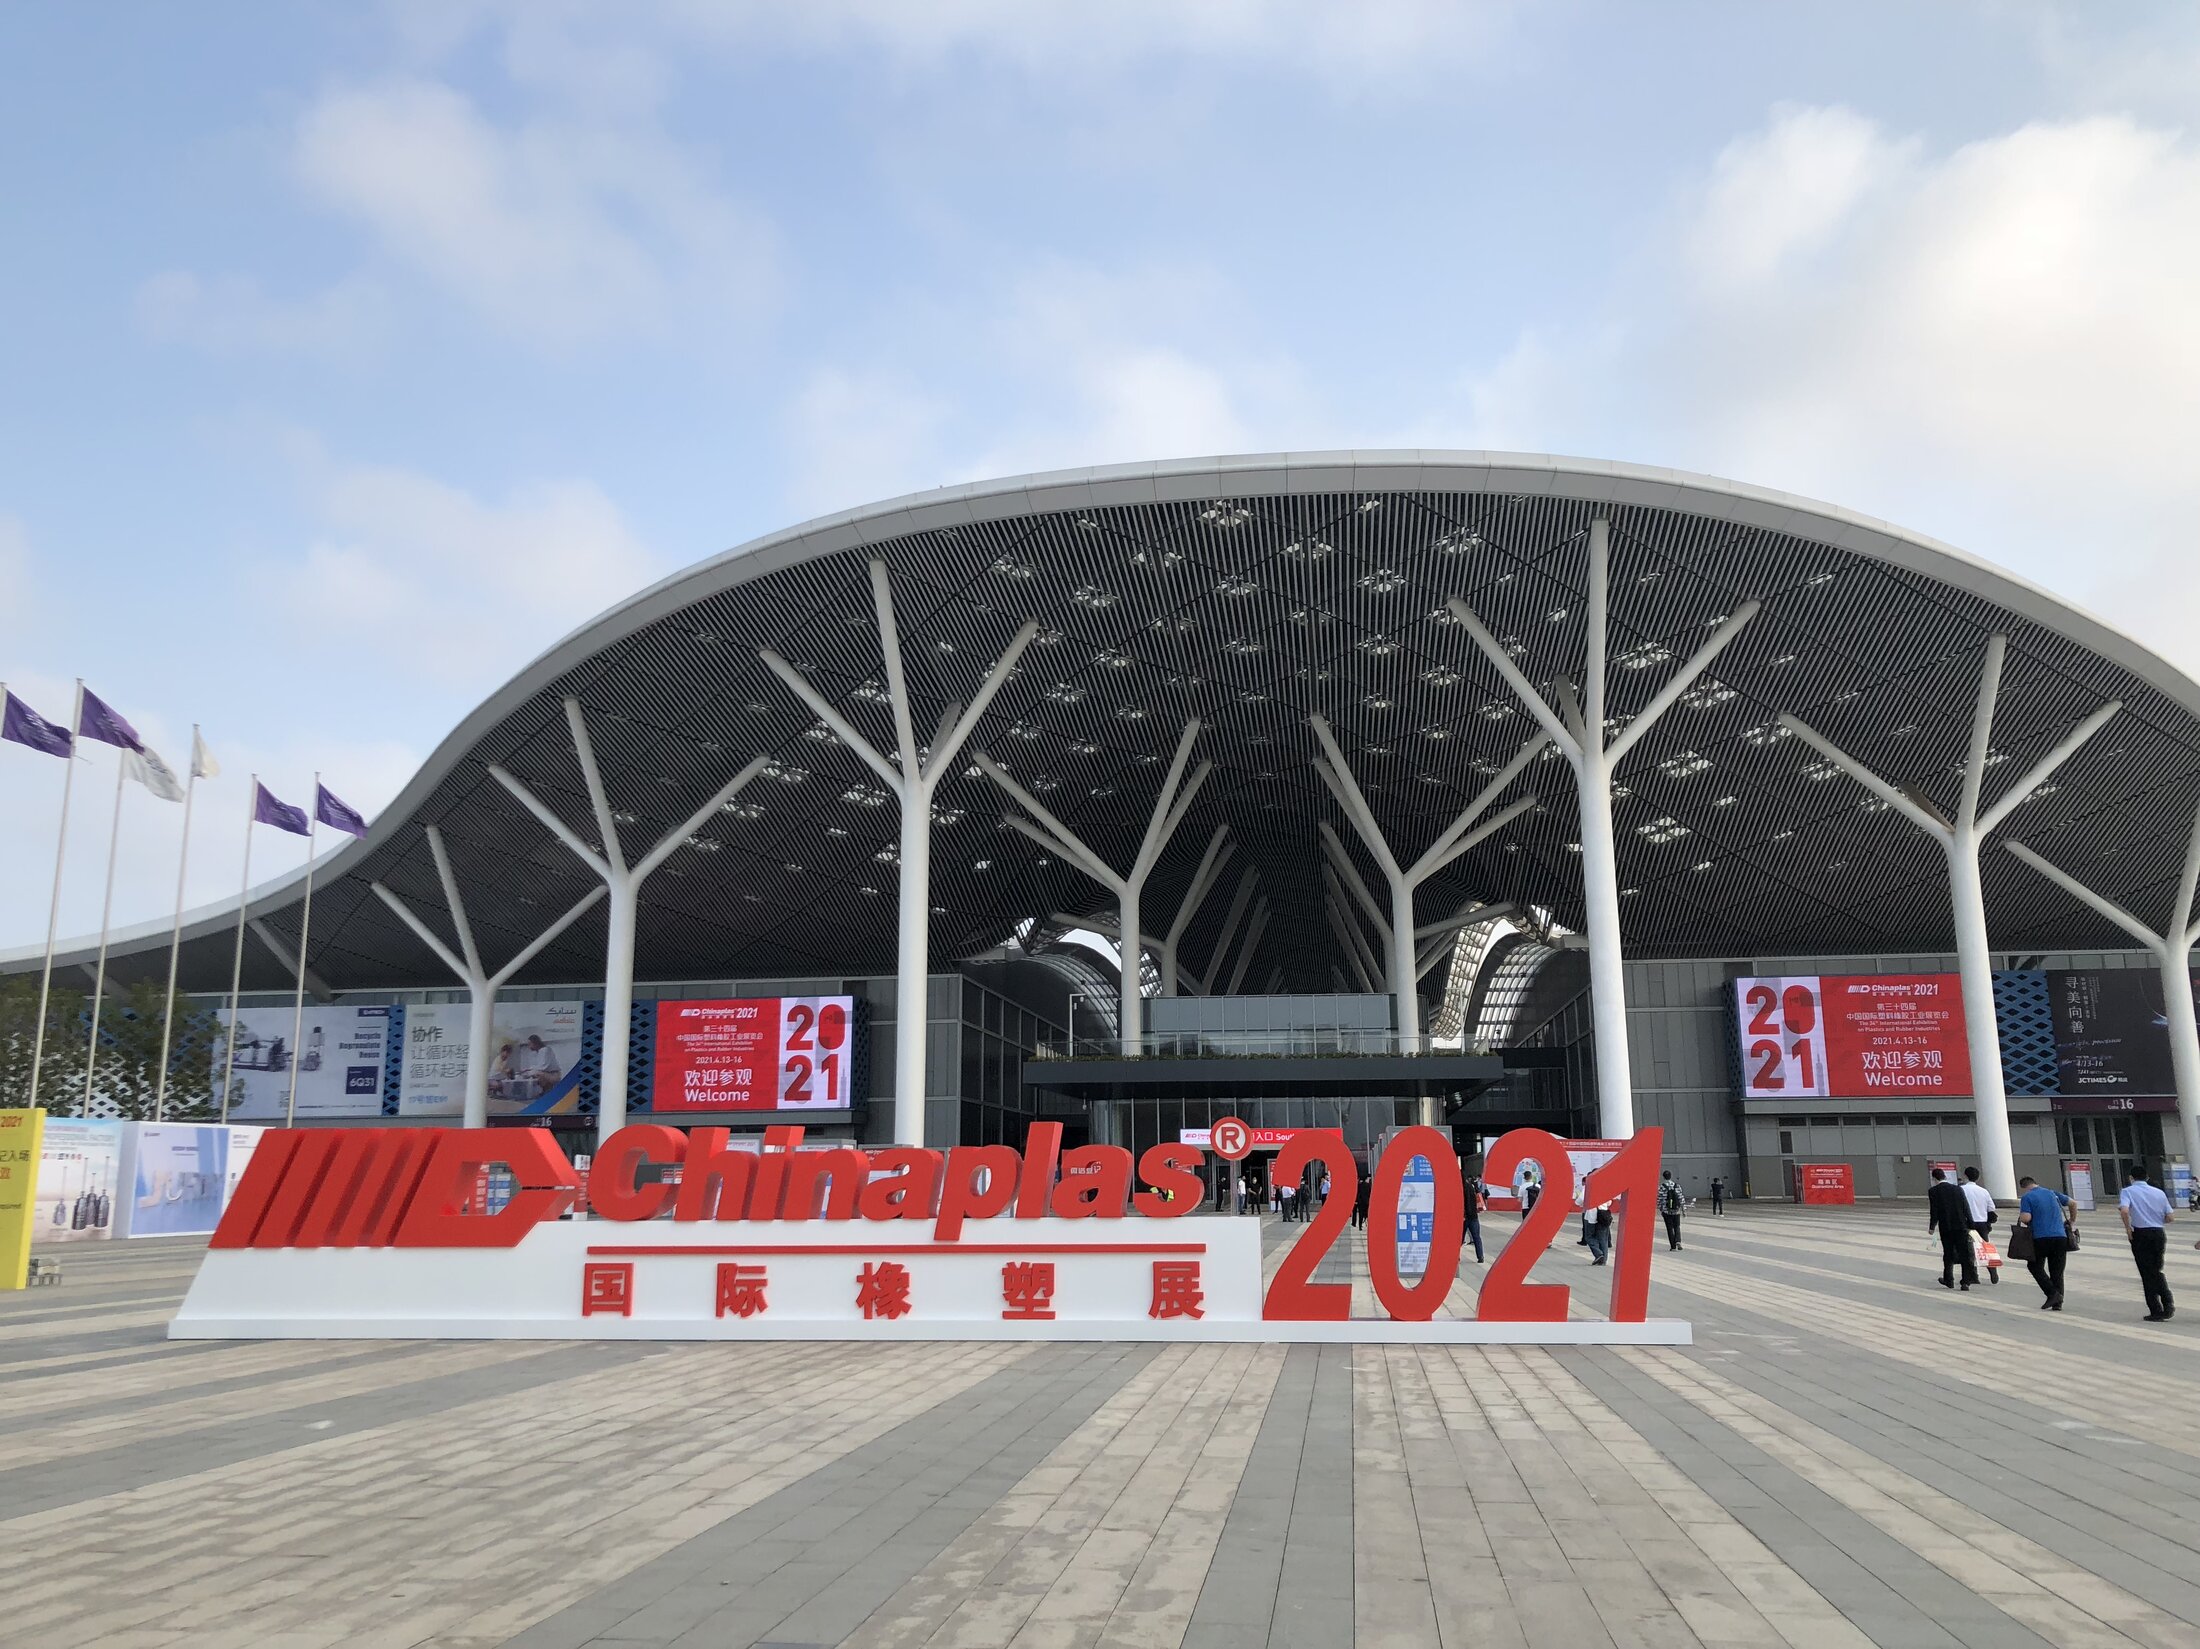 Chinaplas 2021 – the first major event in 2021 with more than 152 000 visitors. | © ILLIG Maschinenbau GmbH